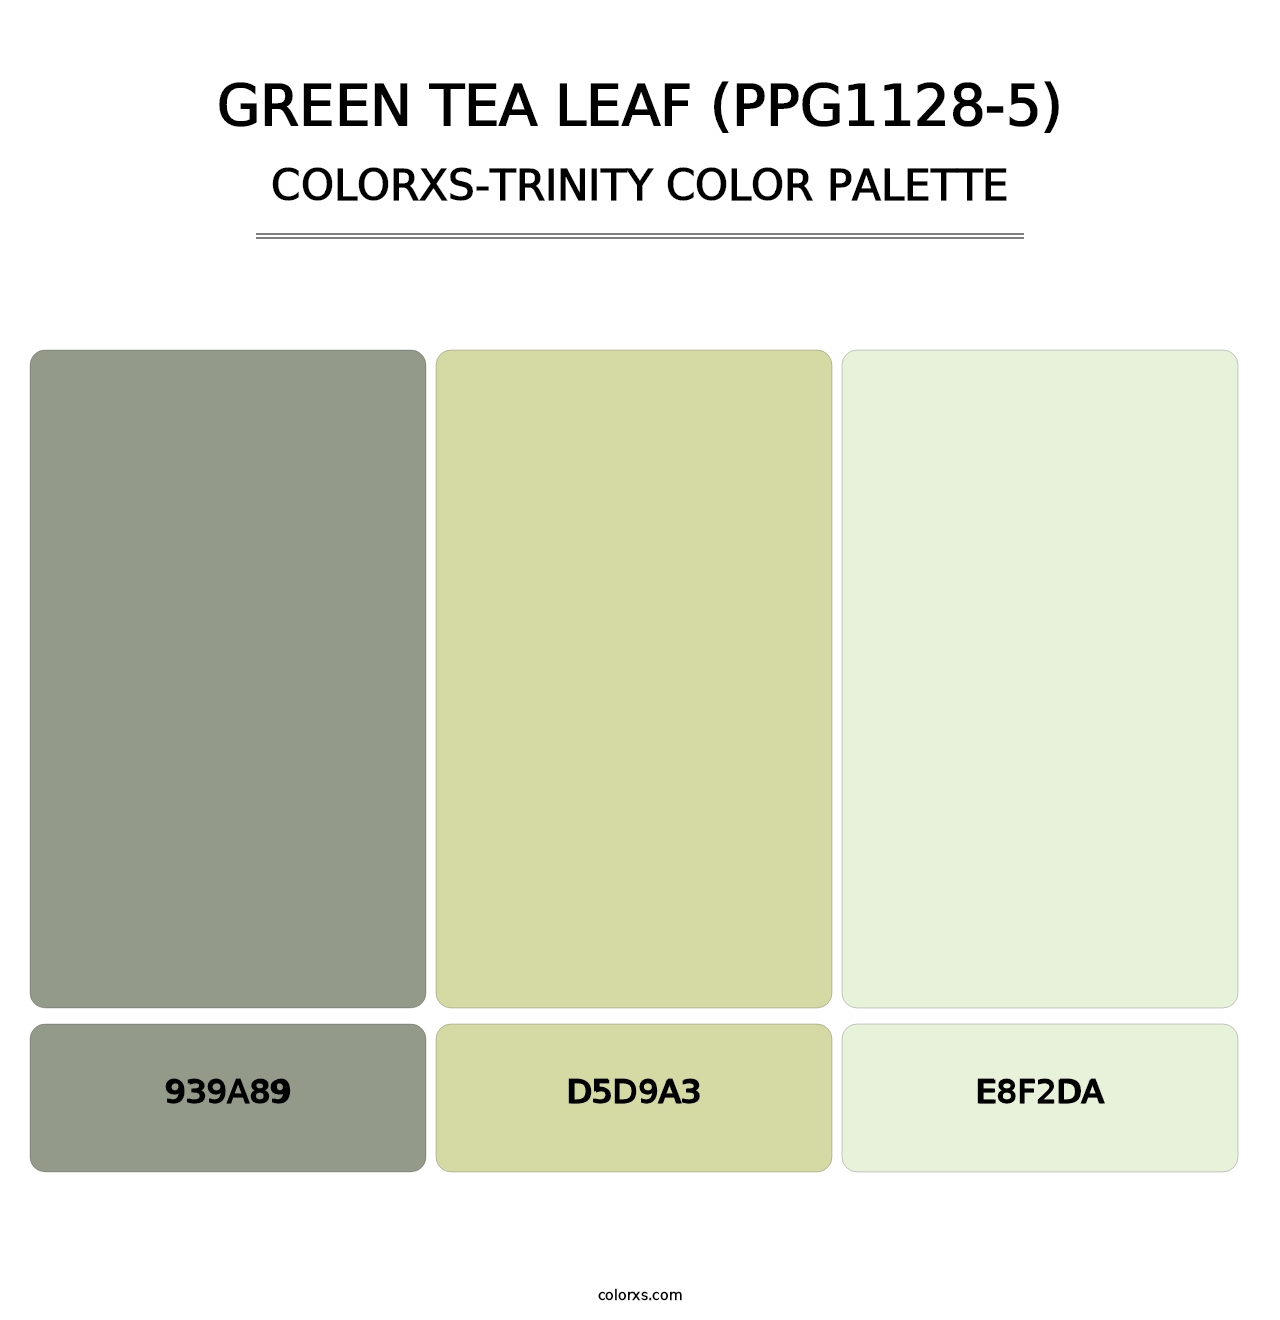 Green Tea Leaf (PPG1128-5) - Colorxs Trinity Palette